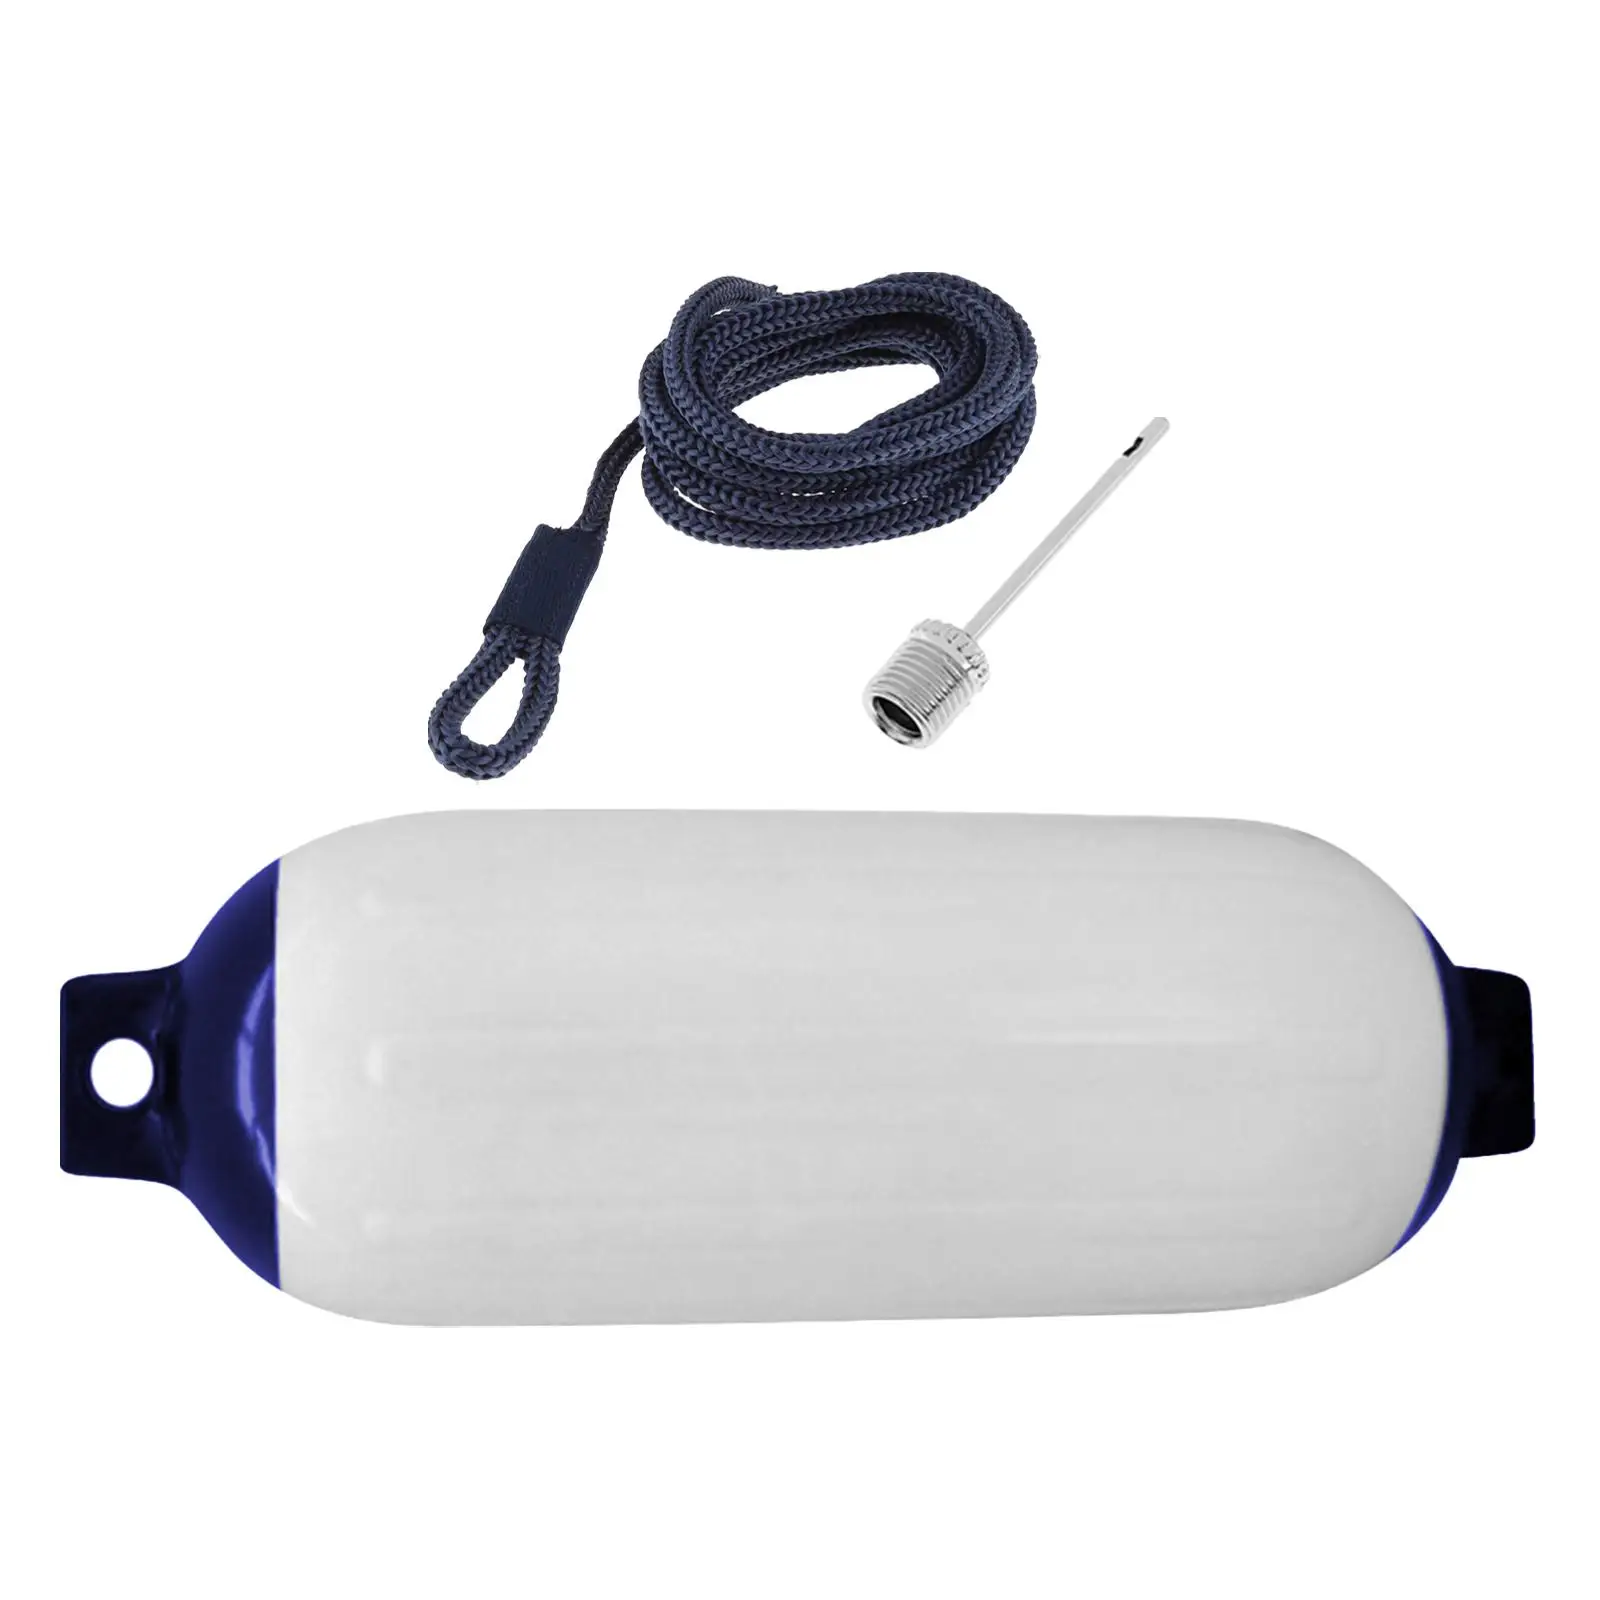 Boat Fender Kit 4x16inch Protector for Docking Fishing Boats Sailboats